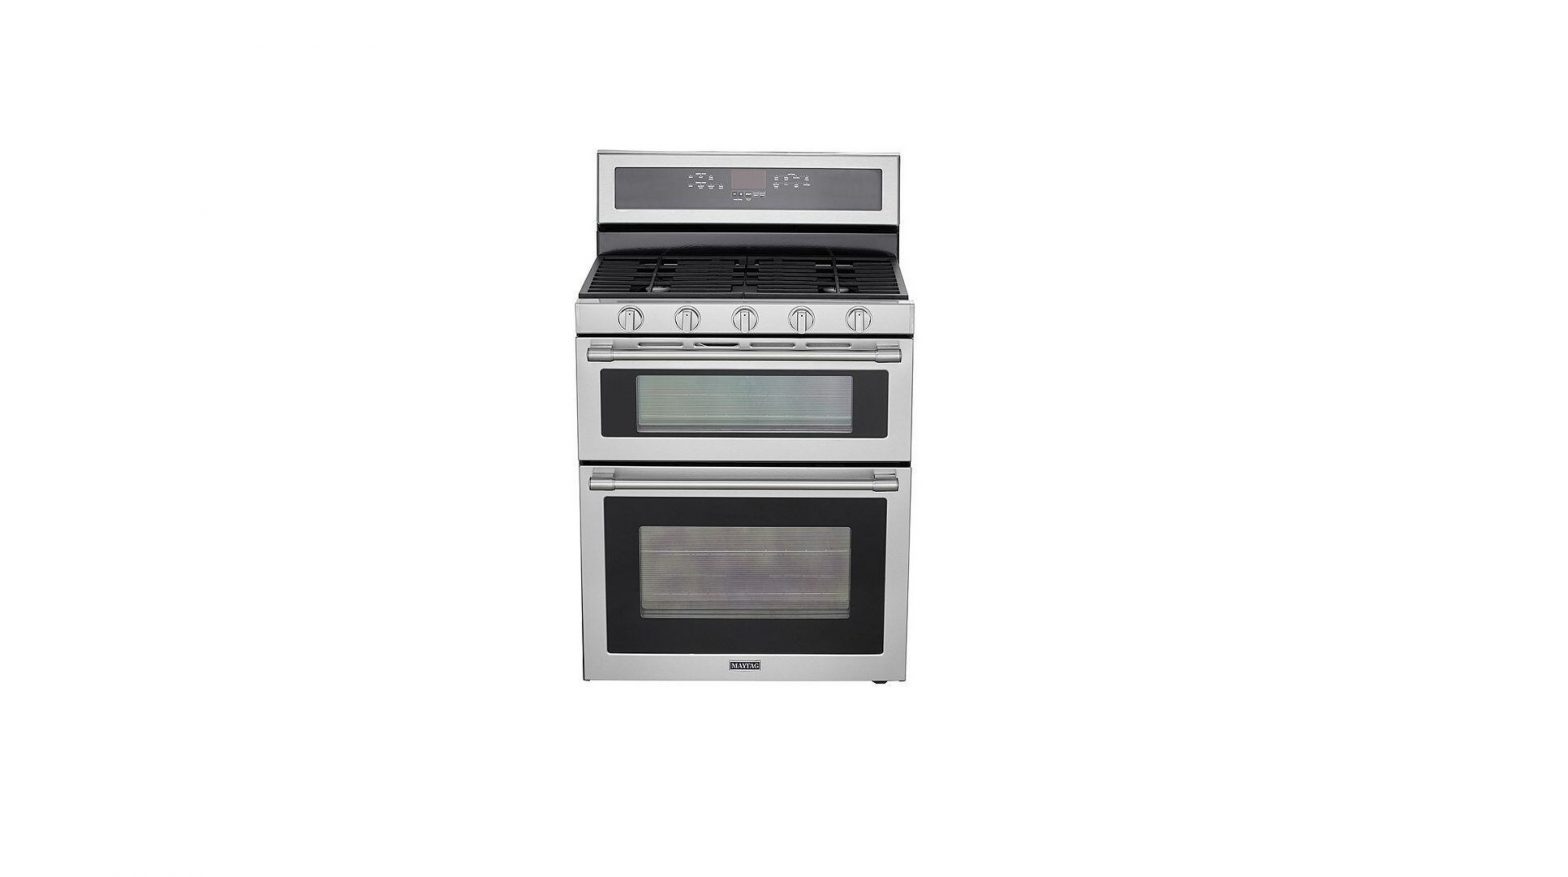 MAYTAG W11241793 Gas Double Oven Range Owner’s Manual